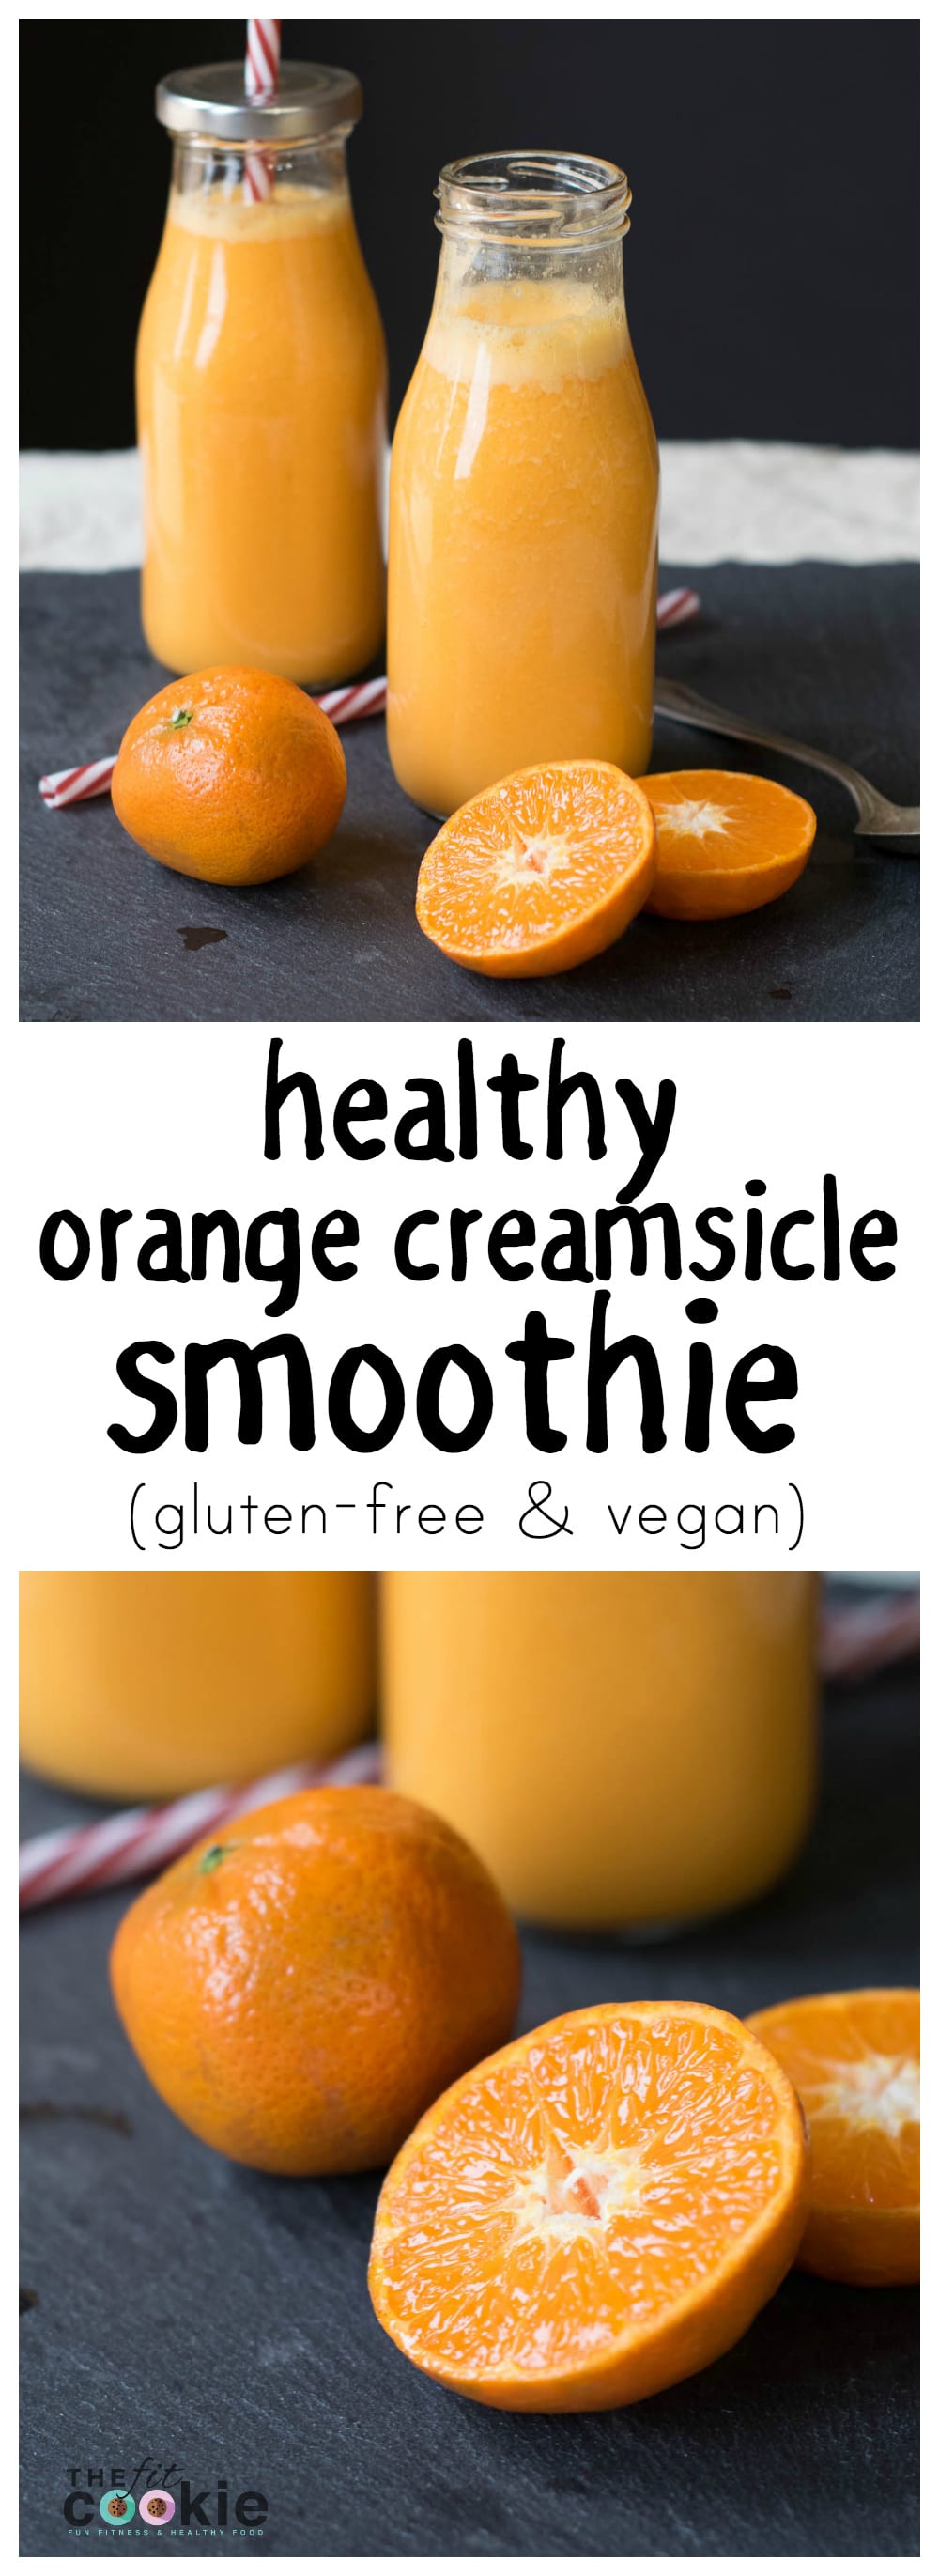 Drink the Rainbow: Healthy Orange Creamsicle Smoothie - Enjoy this lower-sugar smoothie that's full of vitamin C and some hidden veggies (your kids won't know!) - @TheFitCookie #healthy #smoothie #vegan #glutenfree